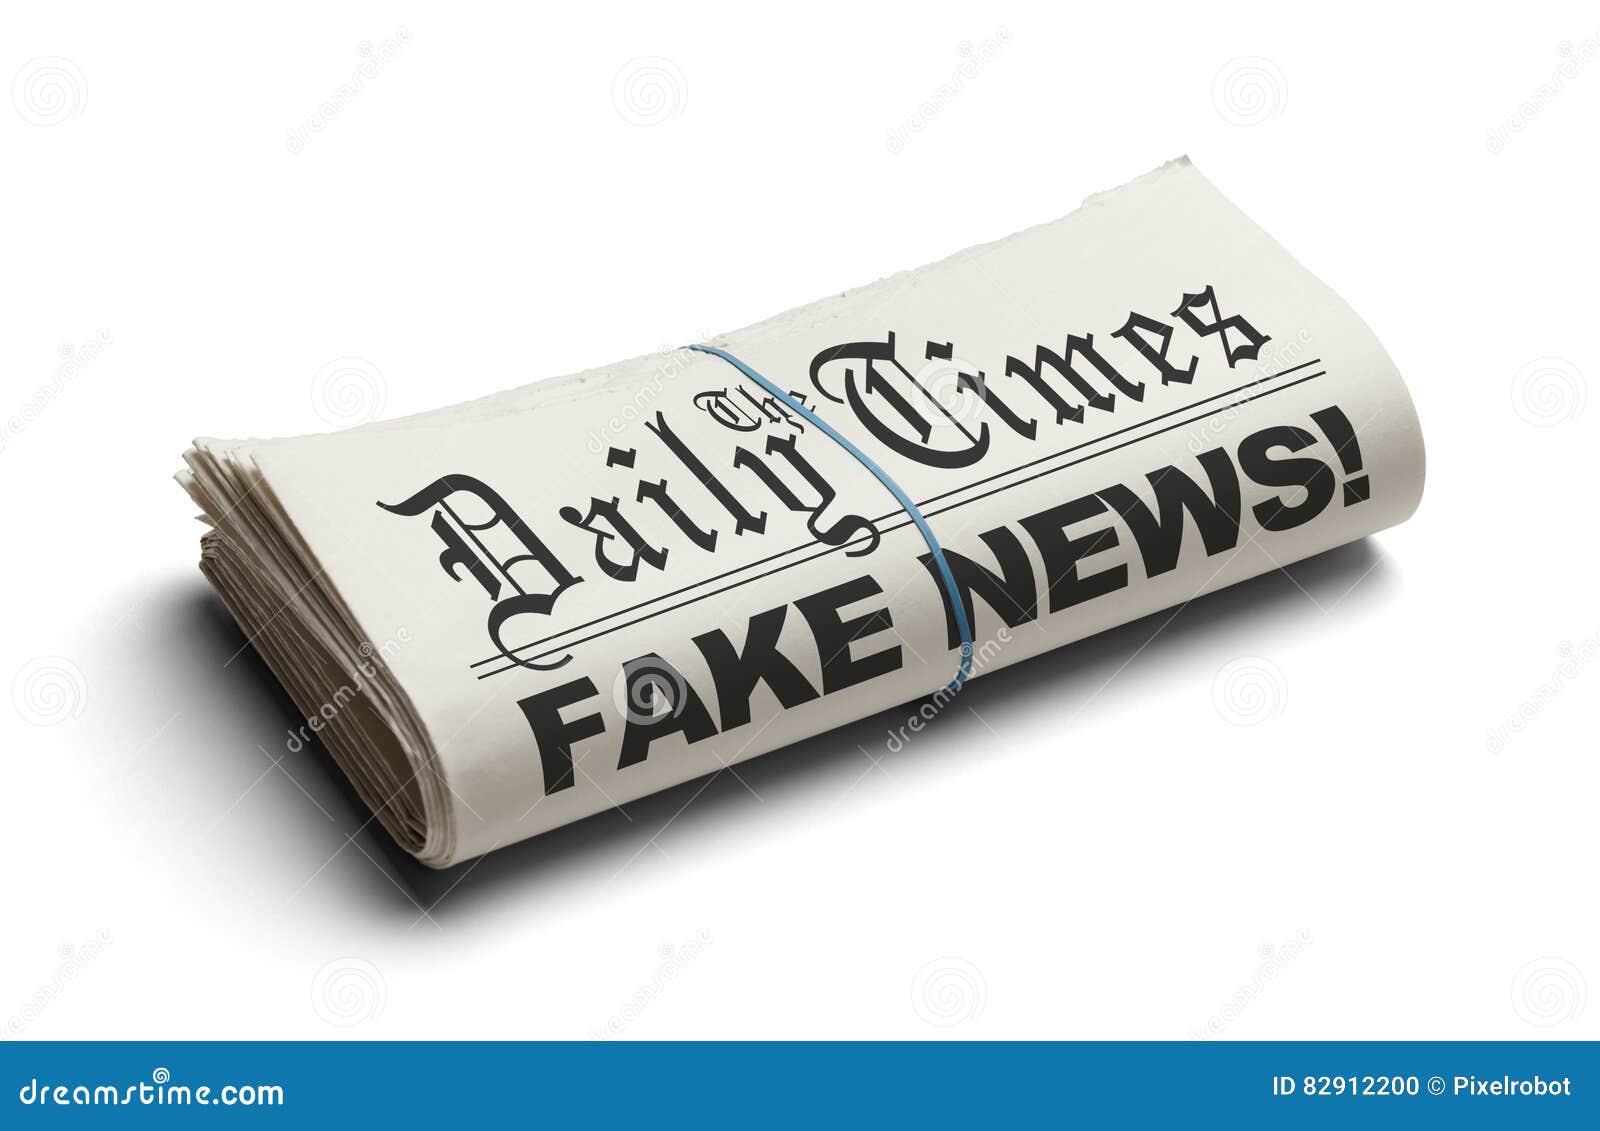 daily times fake news